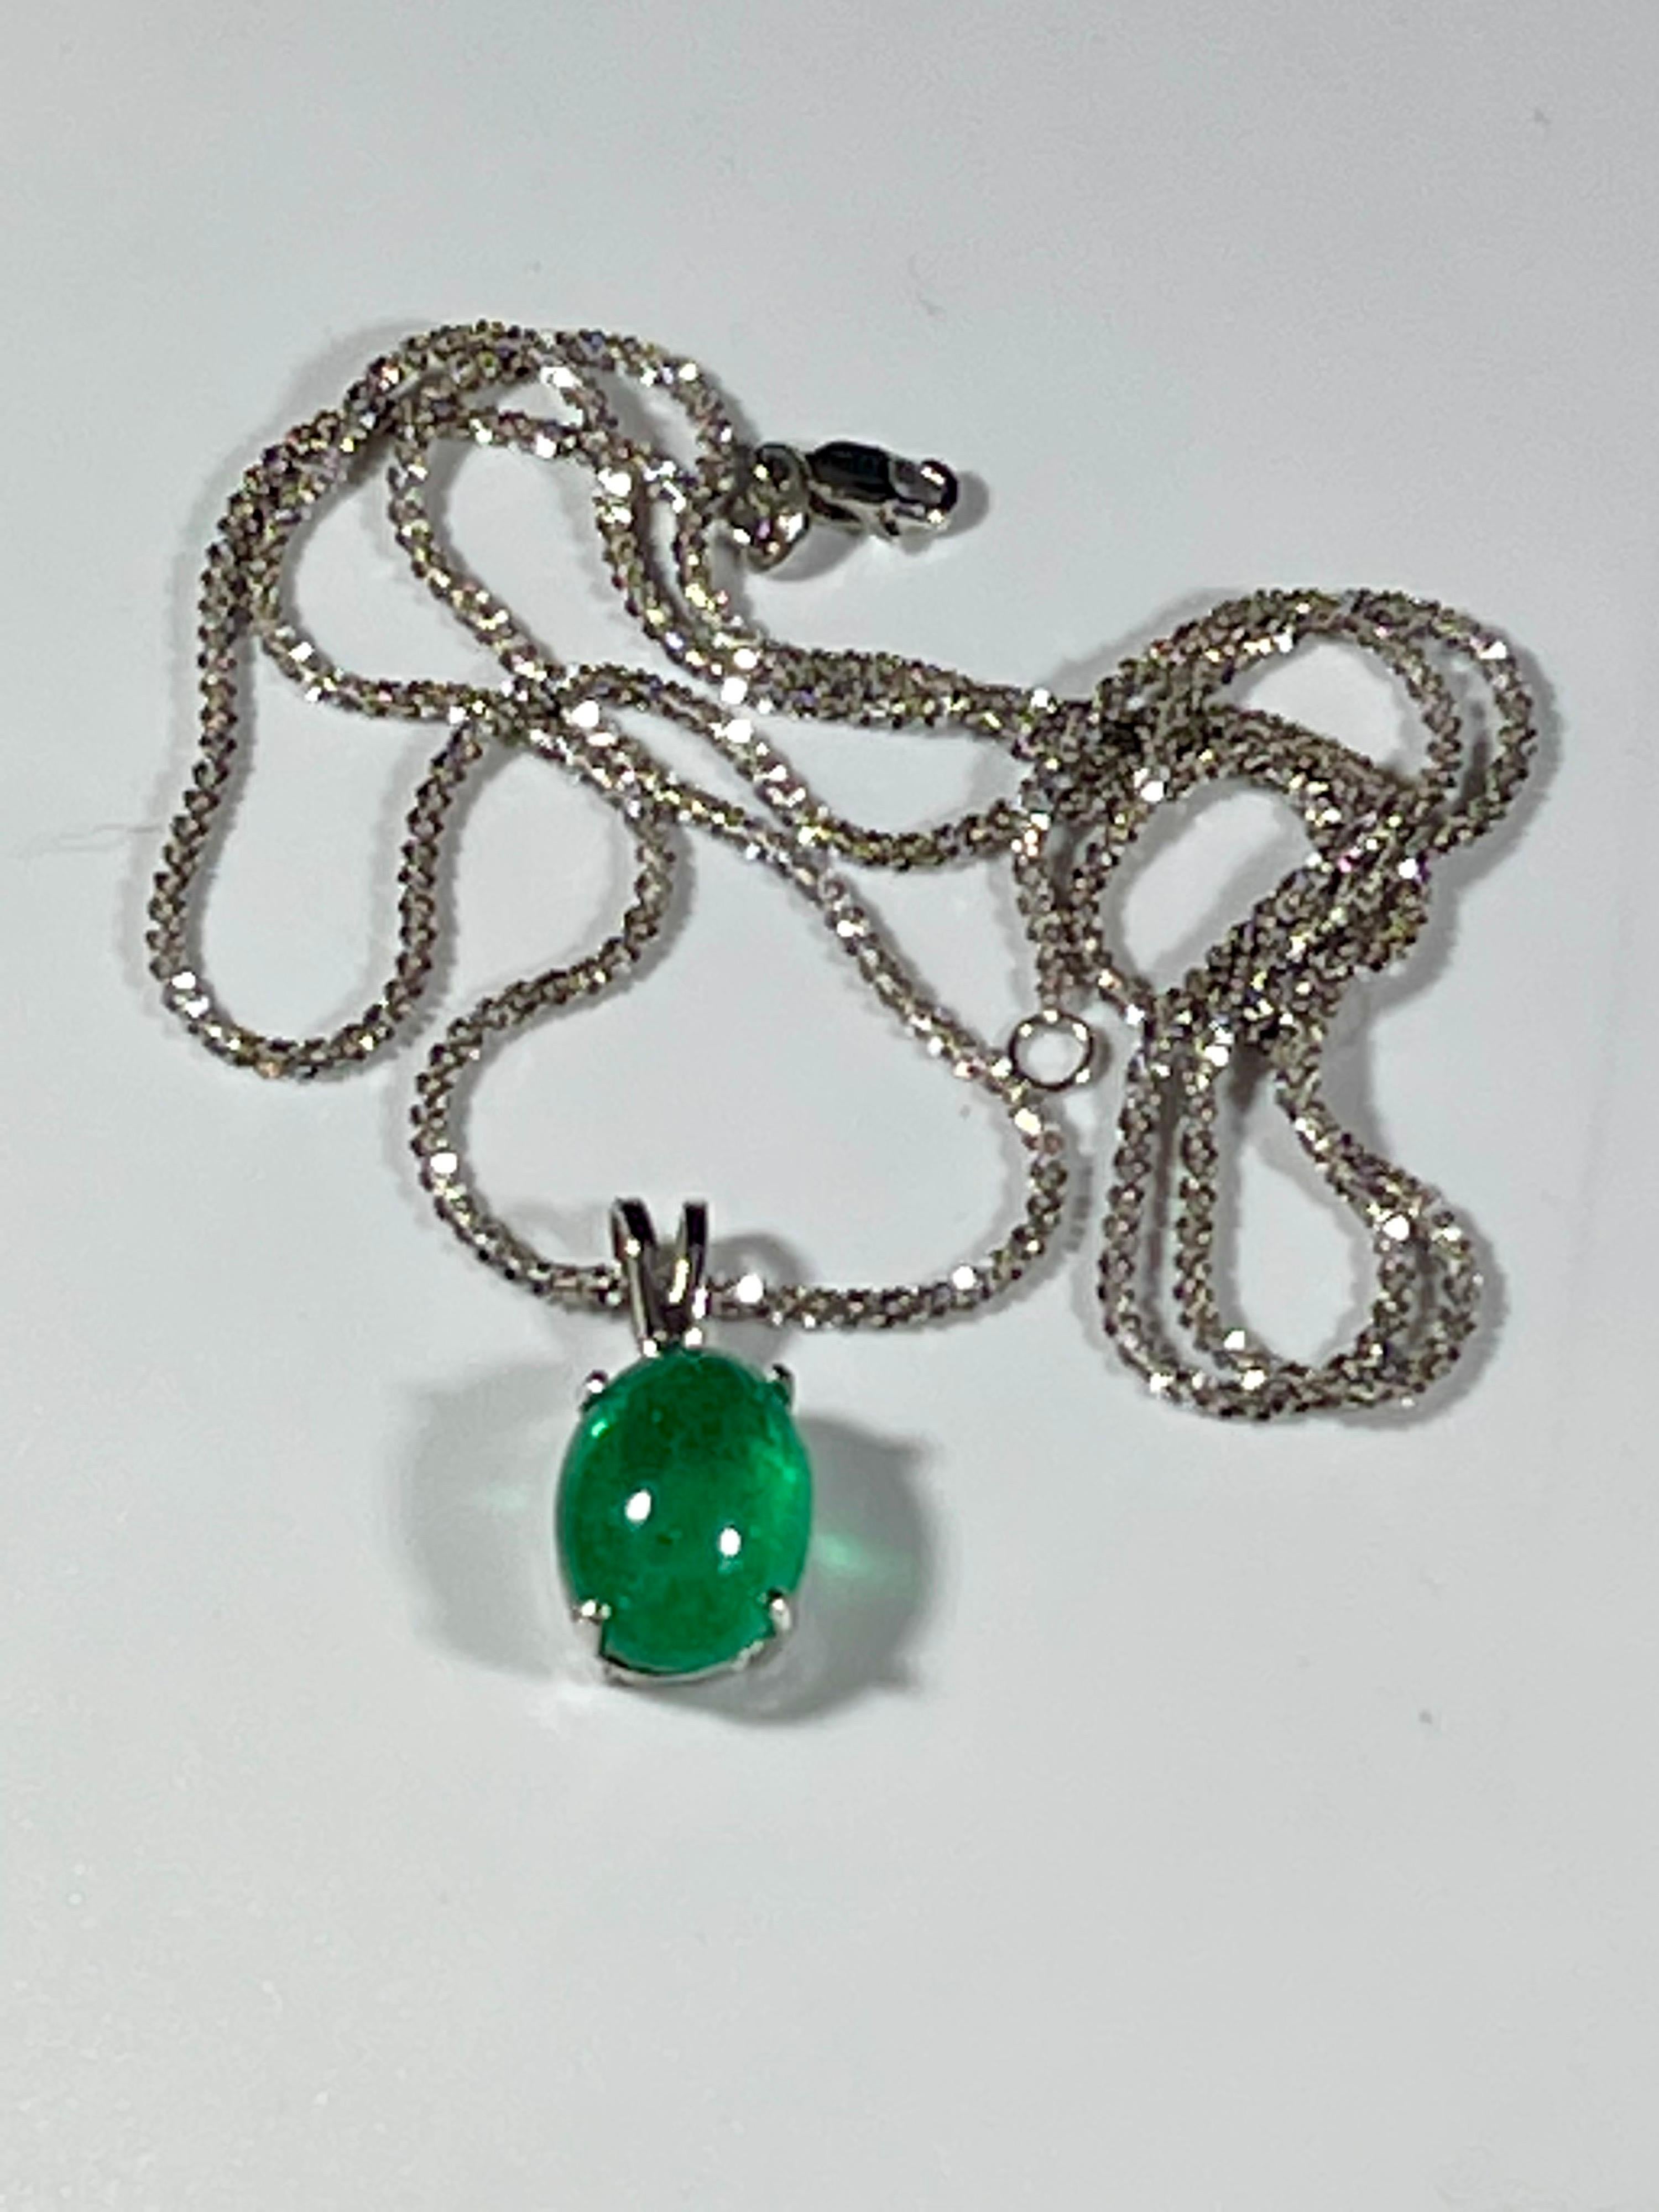 Women's 4.5 Ct Natural Emerald Cabochon Pendant with 14 Karat White Gold Necklace